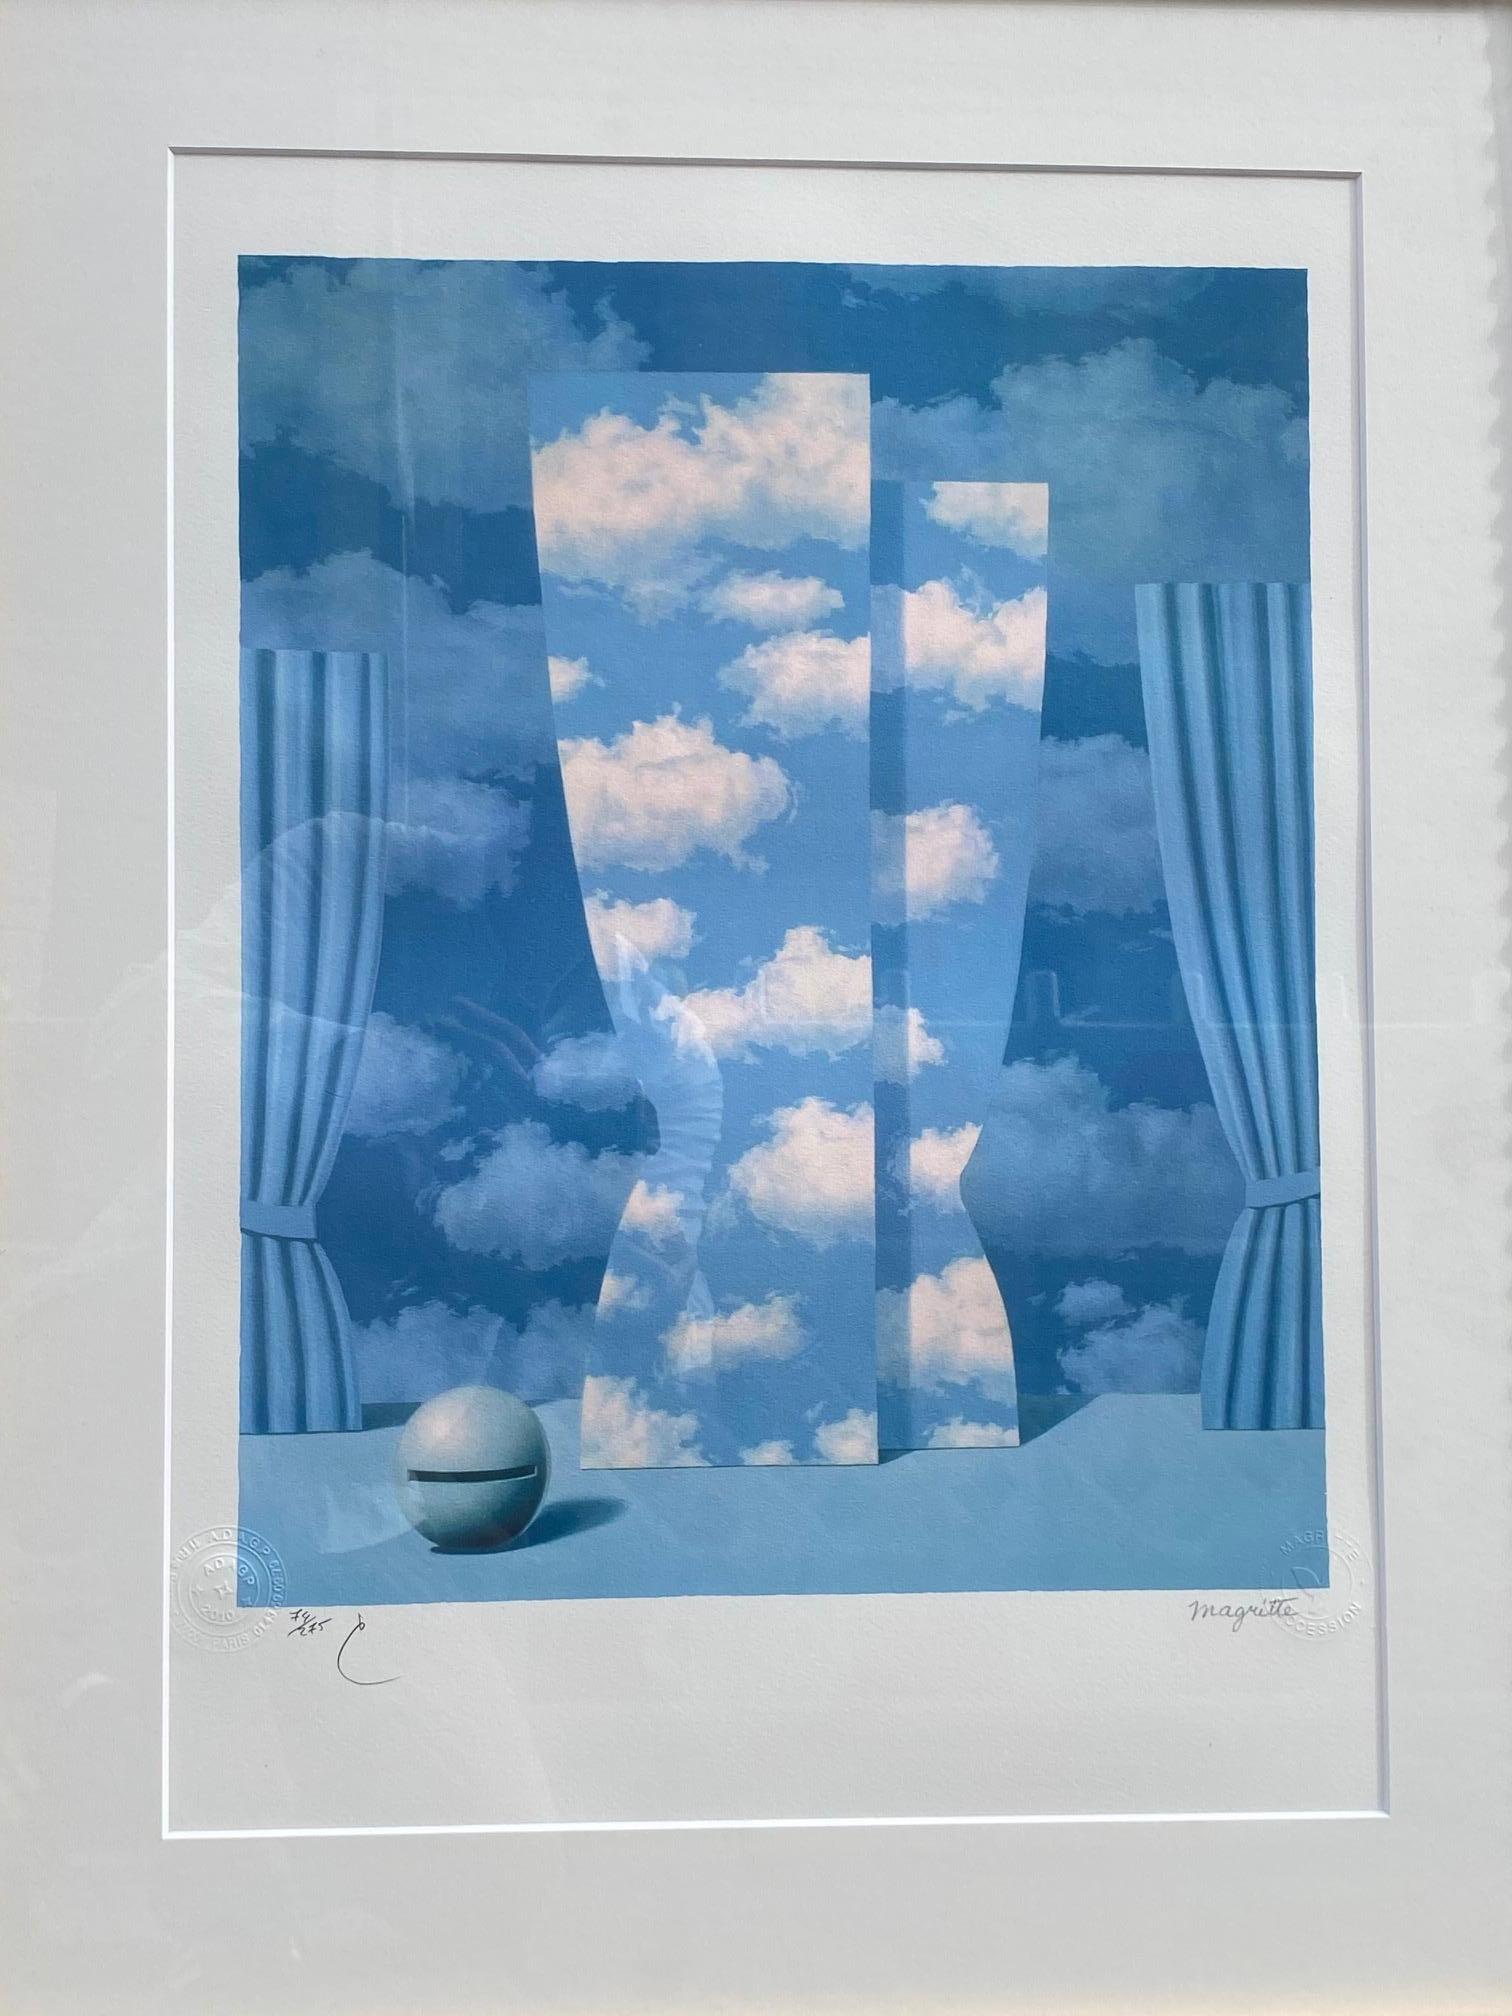 René Magritte Landscape Print - Wasted Effort - Magritte lithograph surrealistic work after his 1962 painting